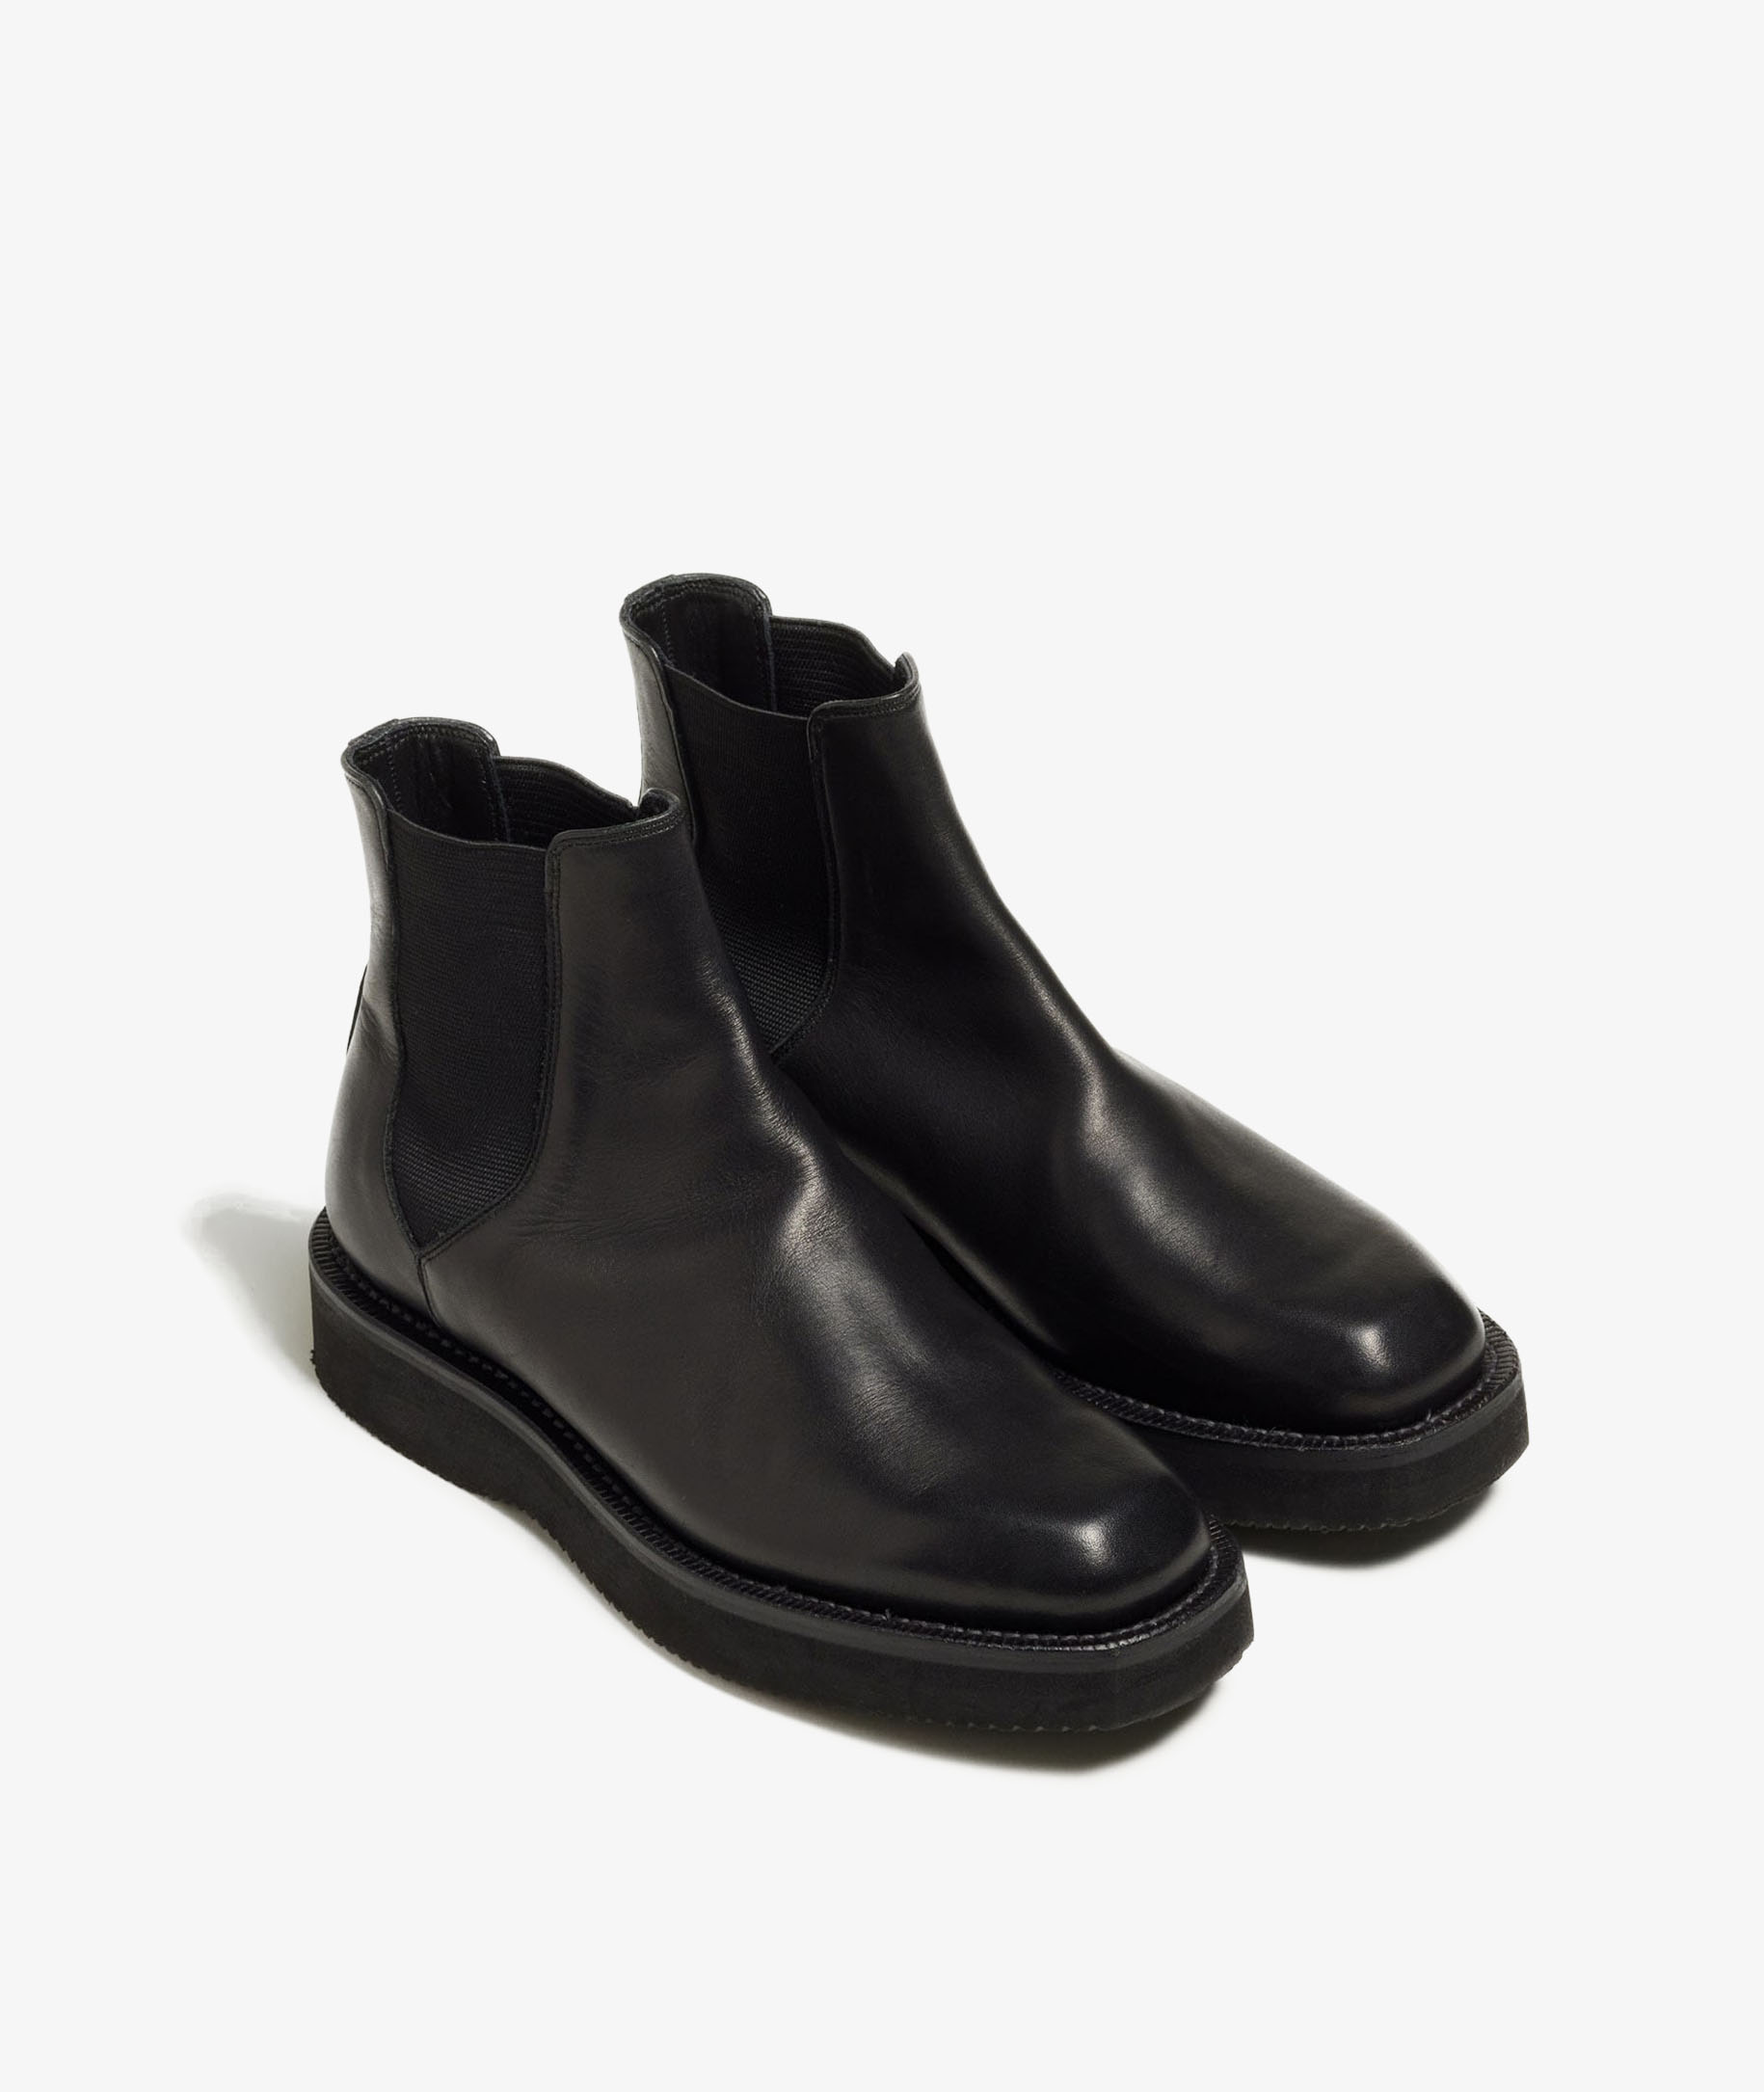 Norse Store | Shipping Worldwide - Auralee LEATHER SQUARE BOOTS 